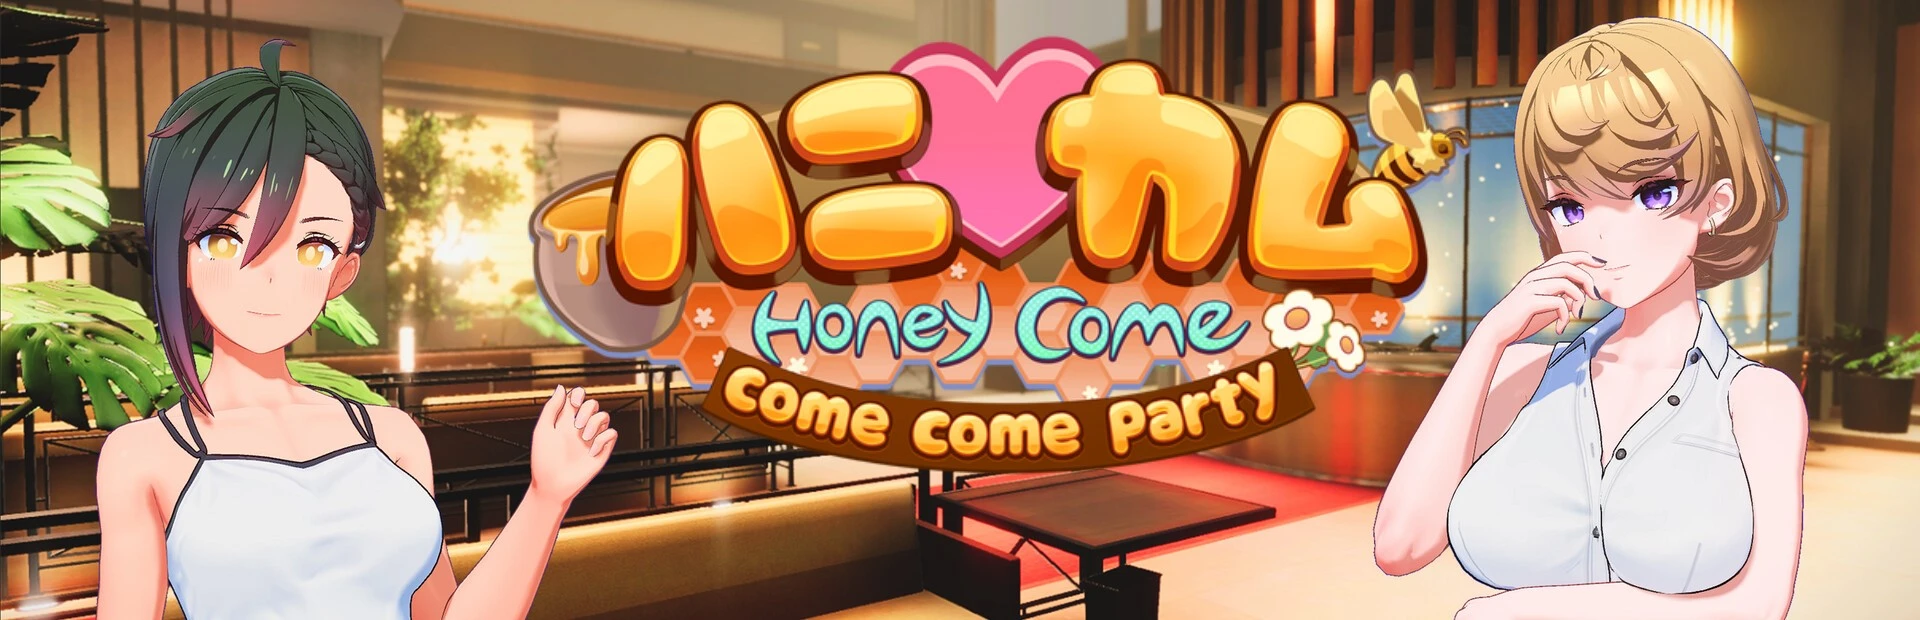 HoneyCome Come Come Party main image